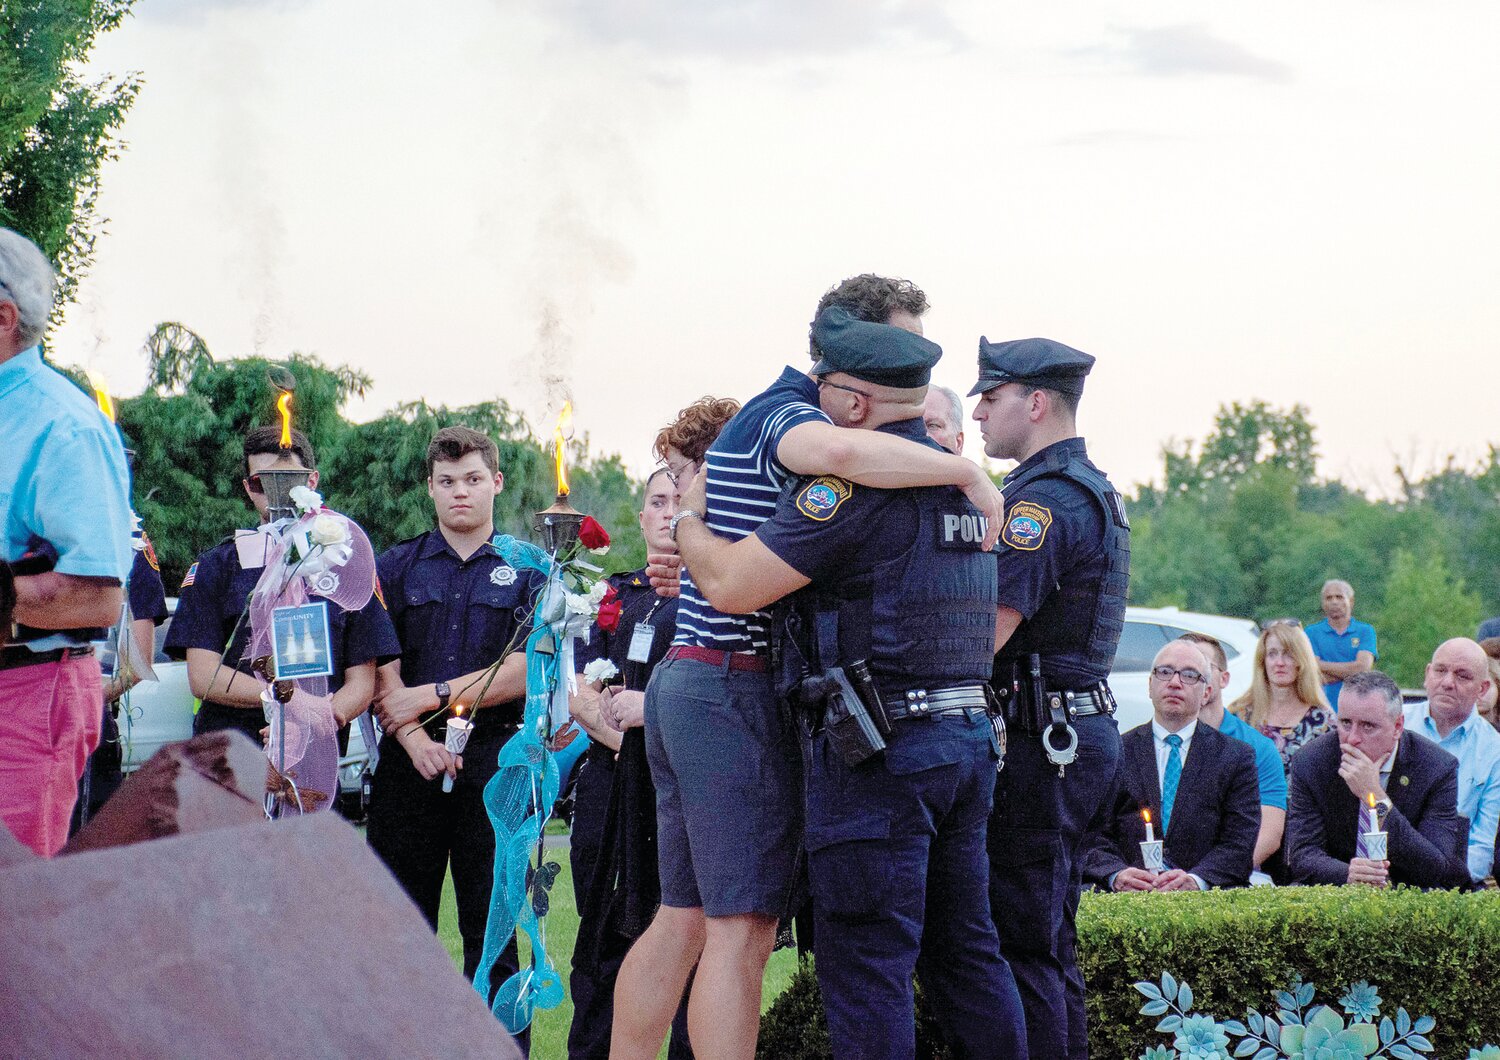 An attendee at the vigil embraces a first responder.